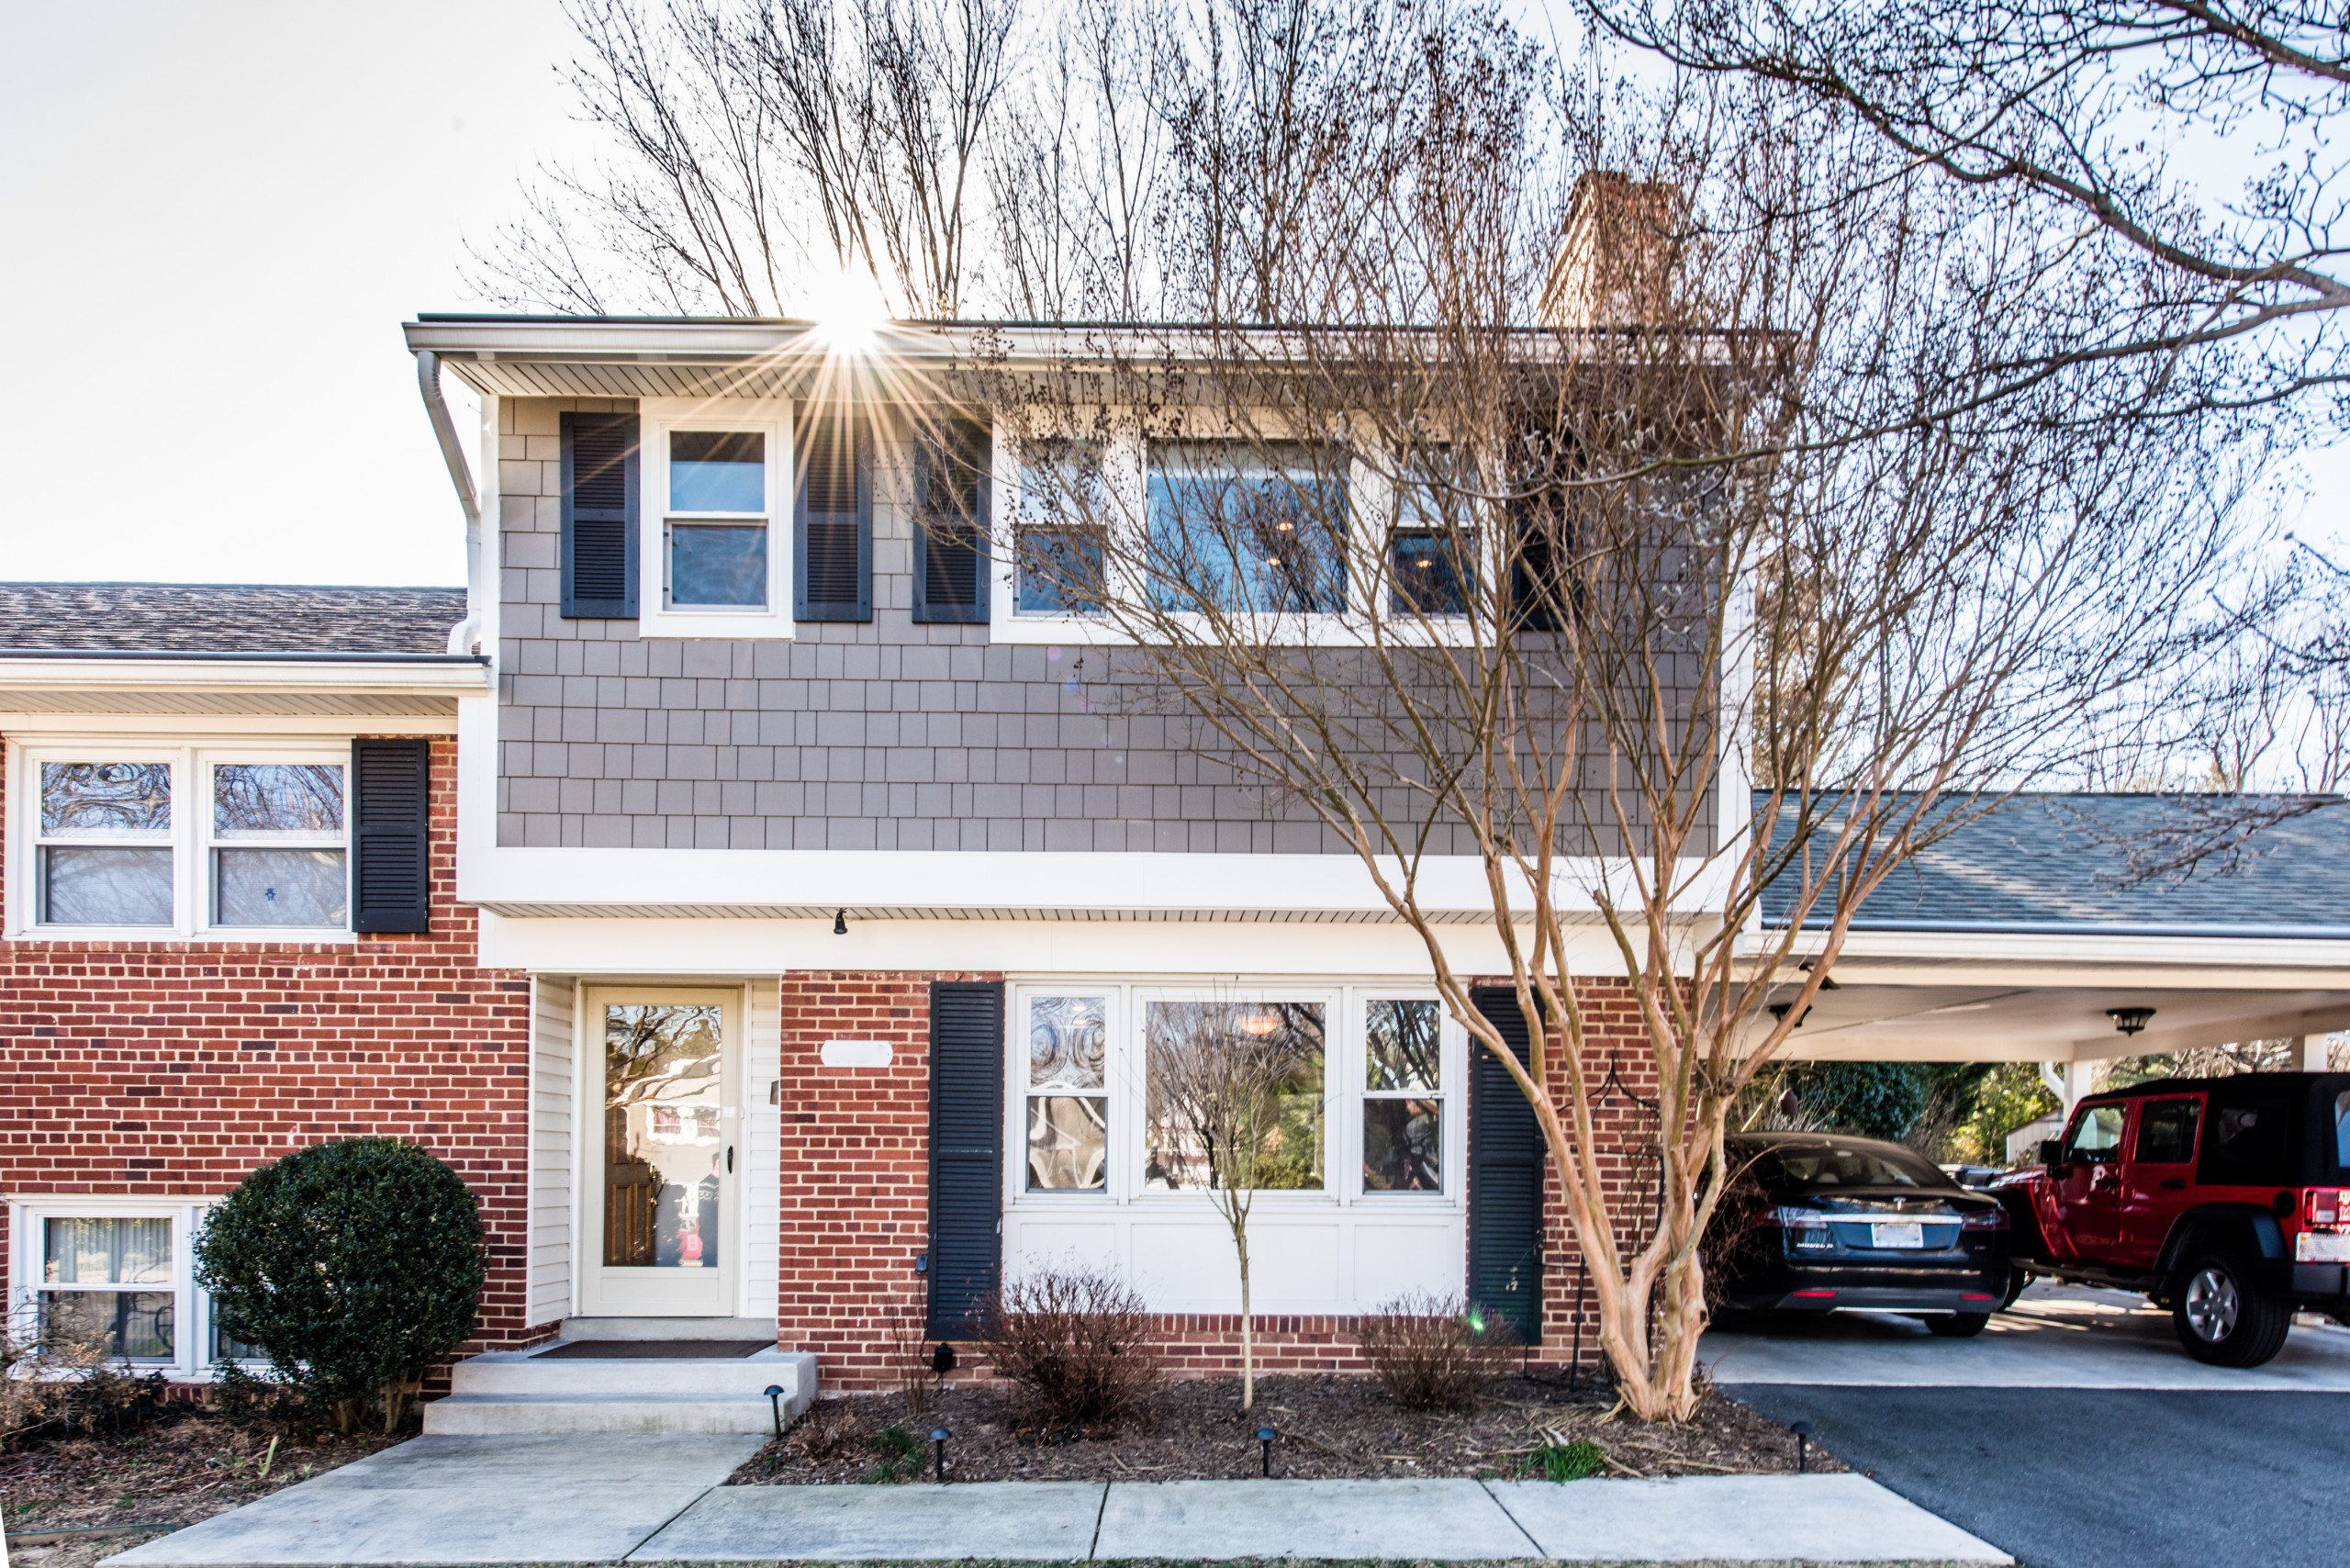 Second Story, Split-Level Addition in McLean, VA